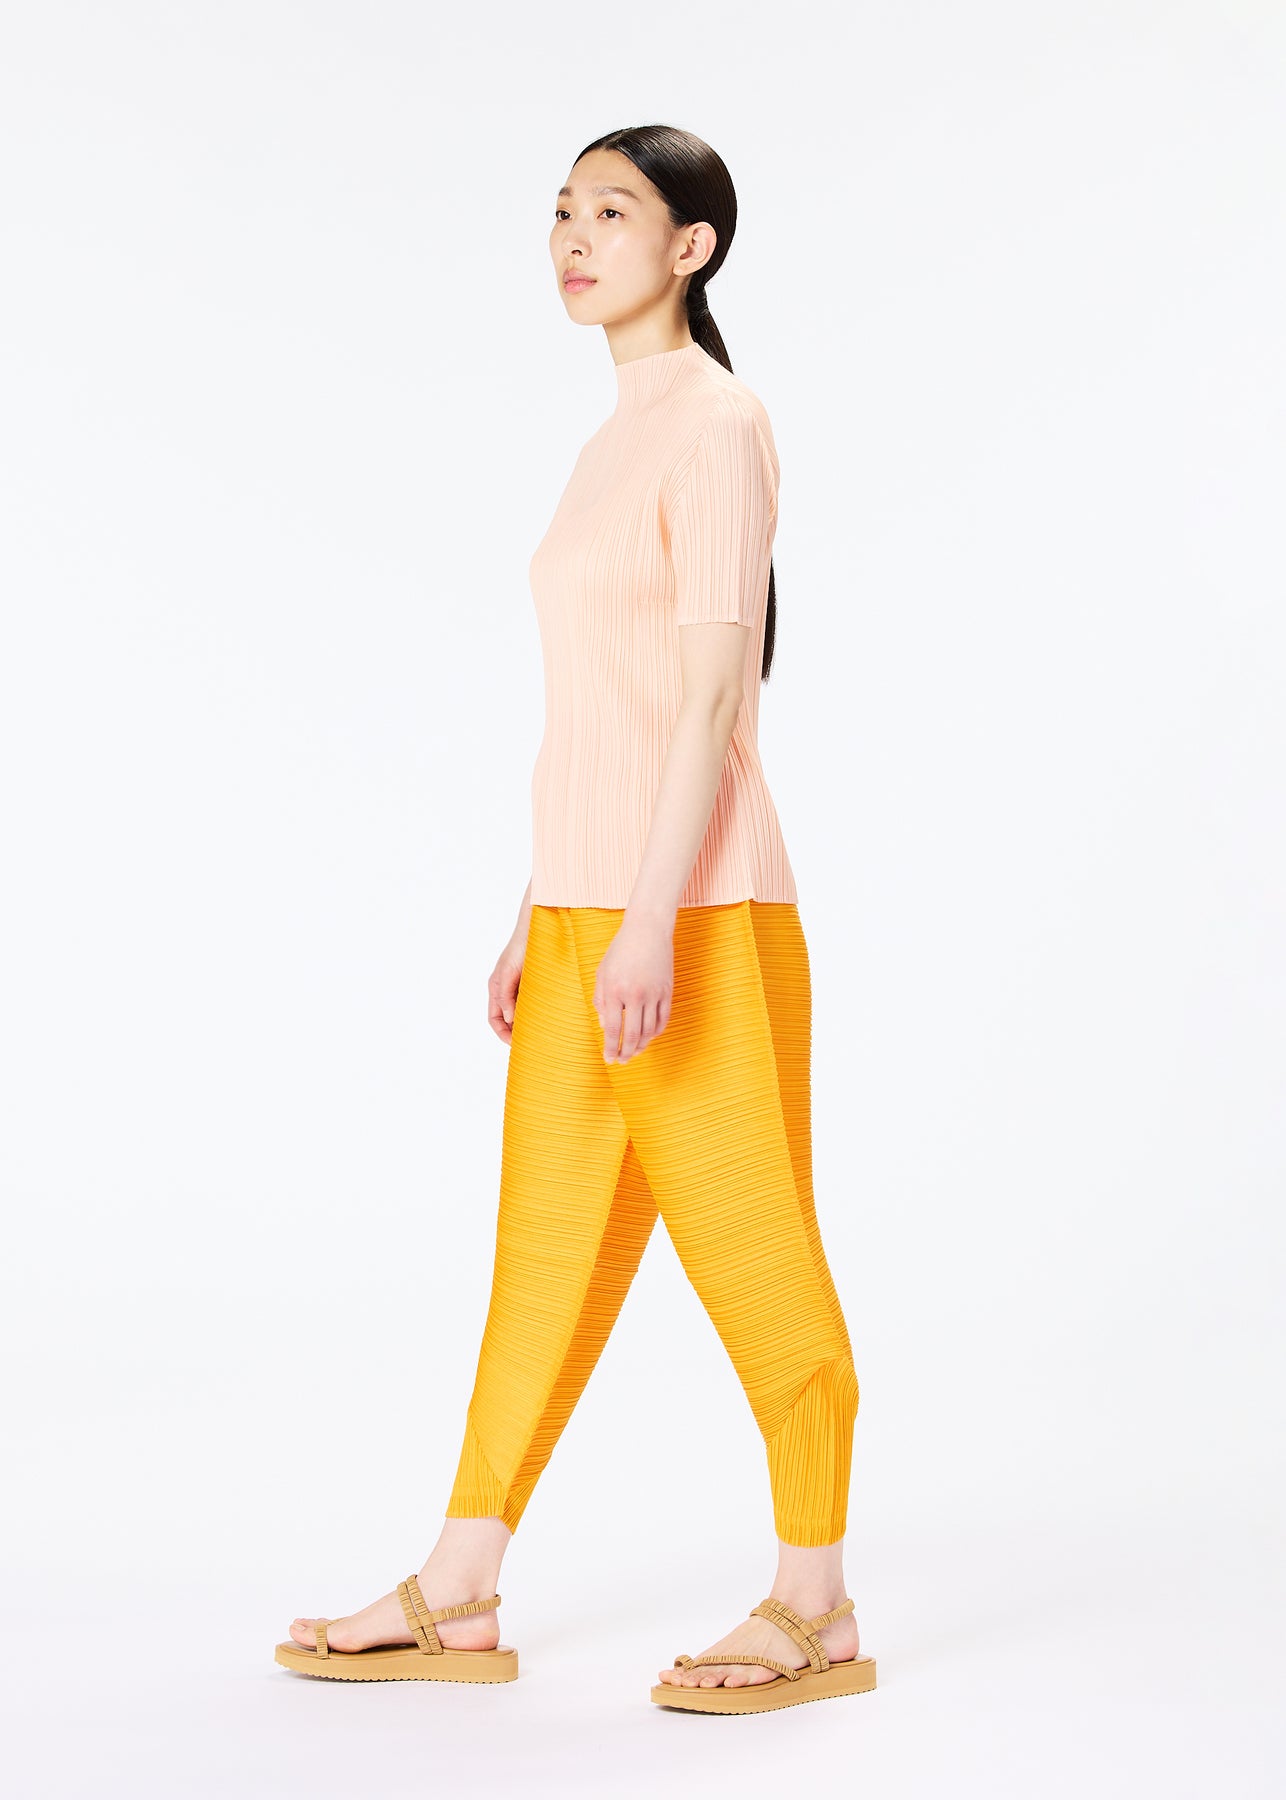 Pleats Please by Issey Miyake May Monthly Colors Pant